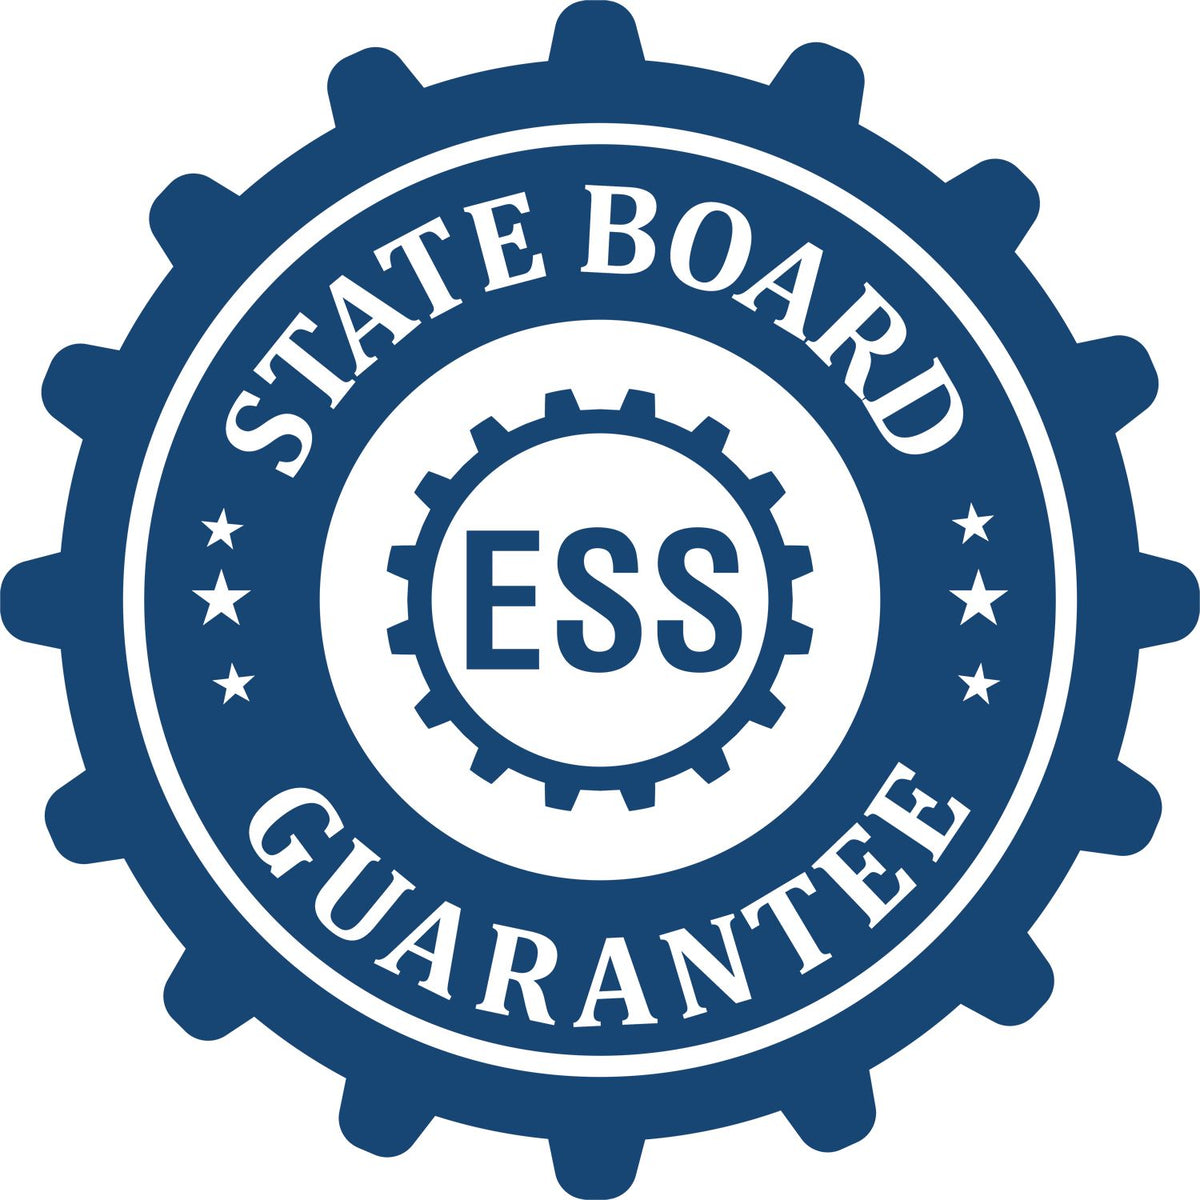 An emblem in a gear shape illustrating a state board guarantee for the State of Michigan Long Reach Architectural Embossing Seal product.